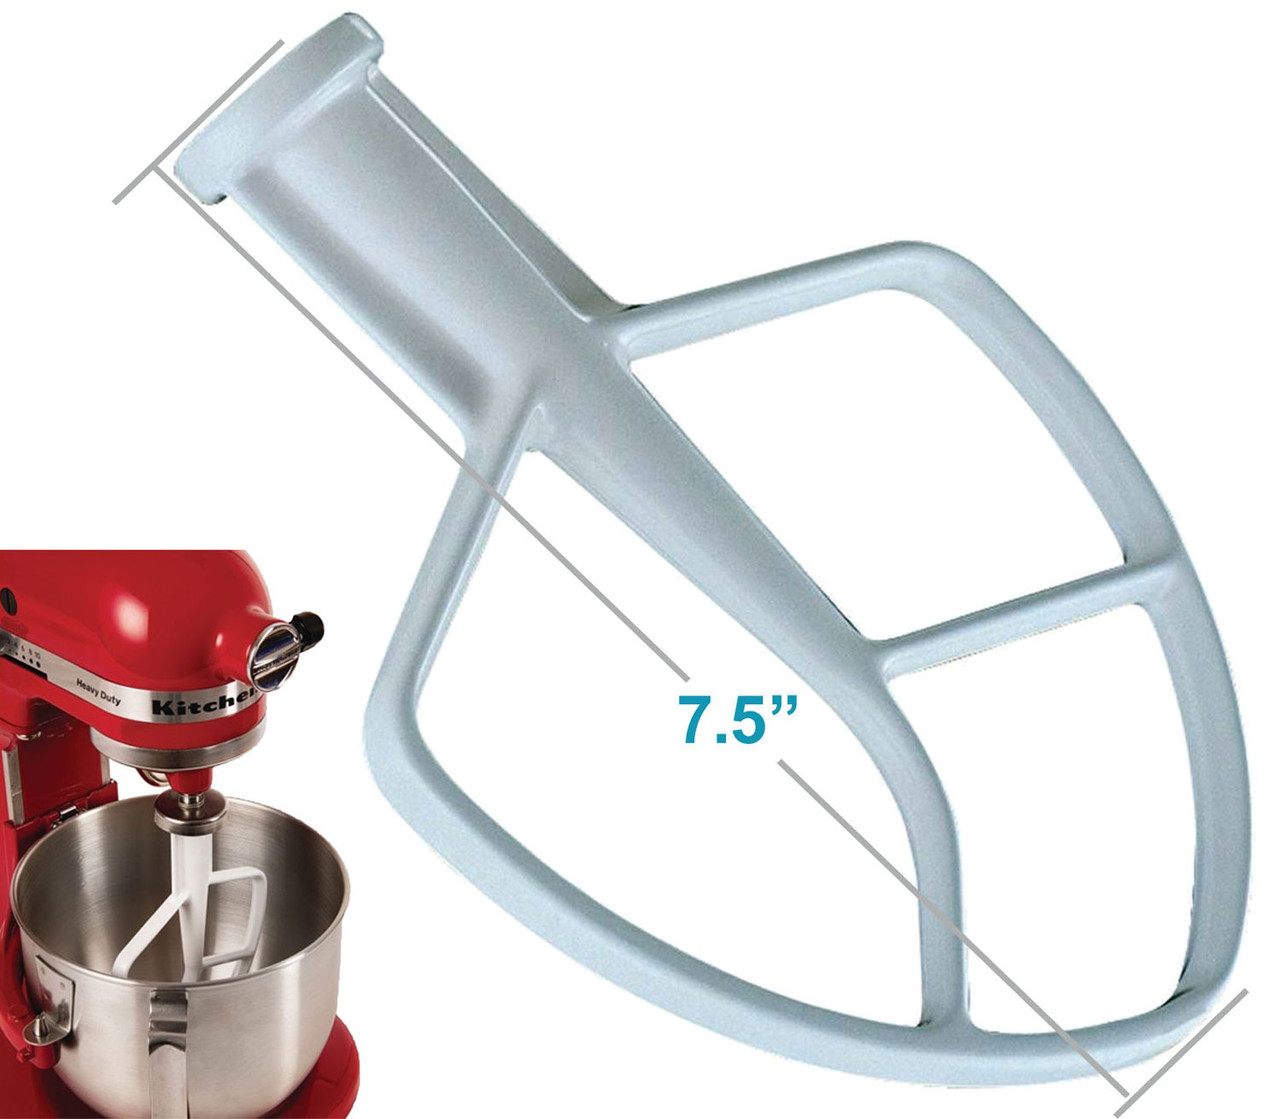  Stainless Steel Flat Beater Attachment for Kitchenaid